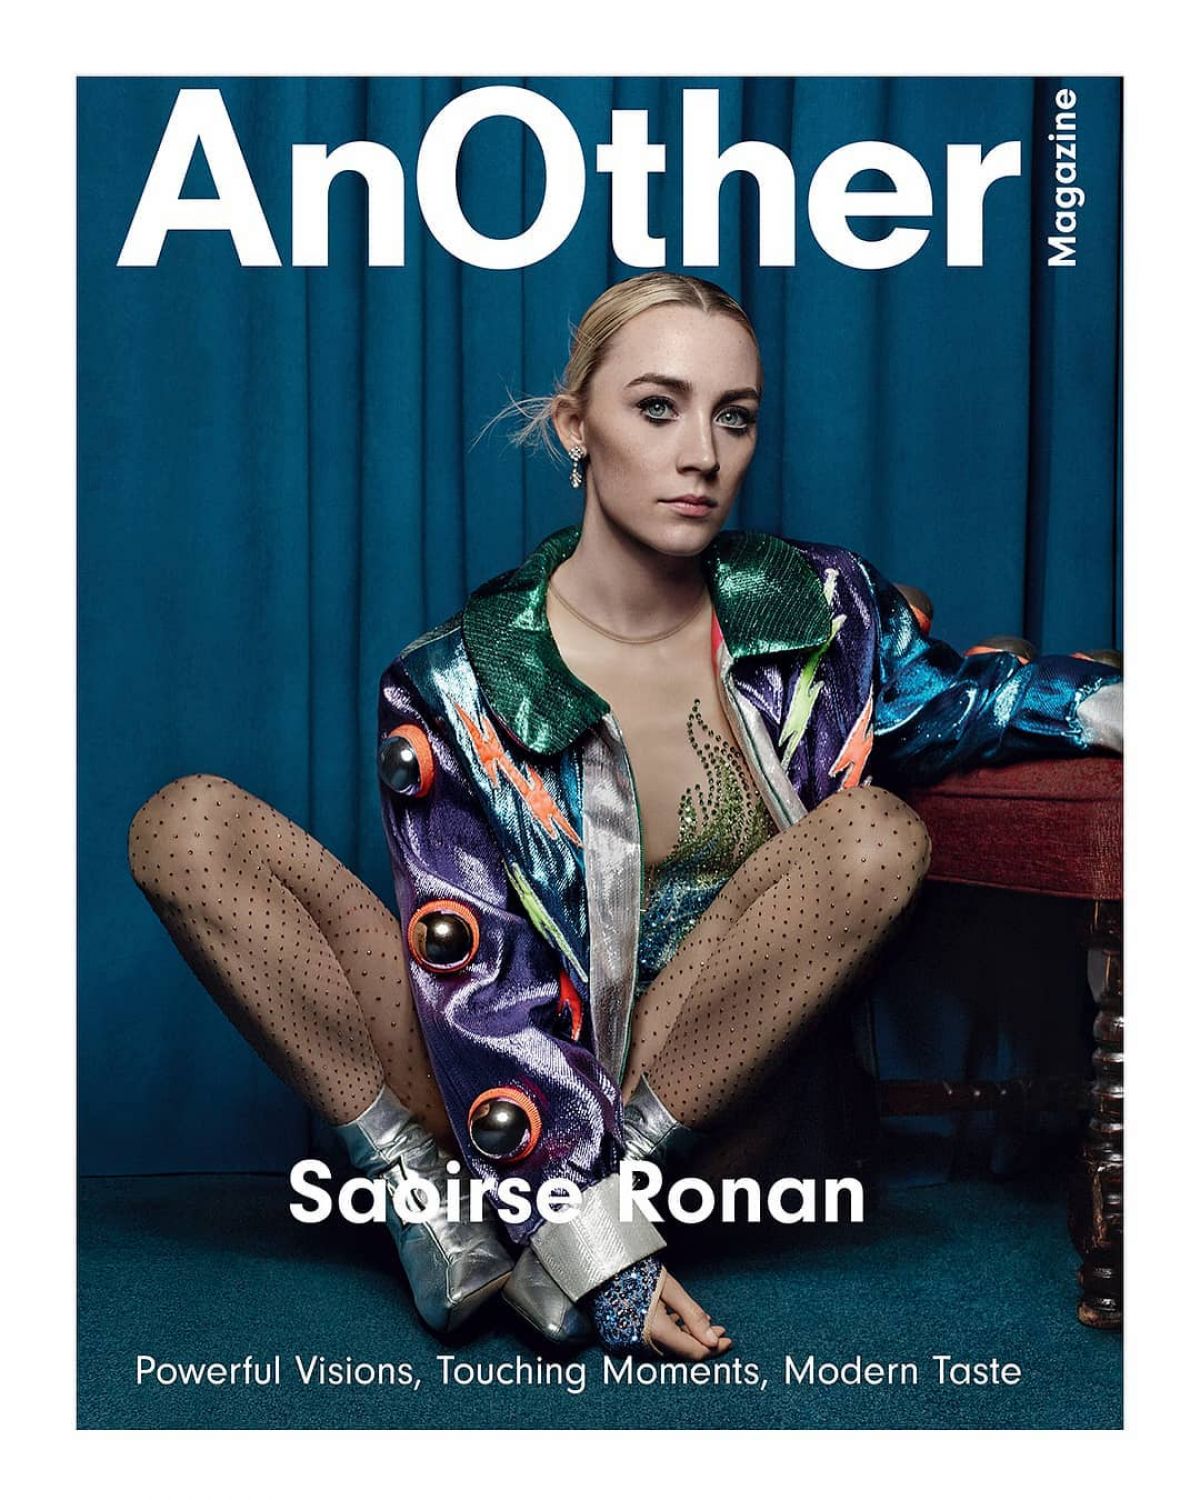 Saoirse Ronan for Another Magazine, February 2018